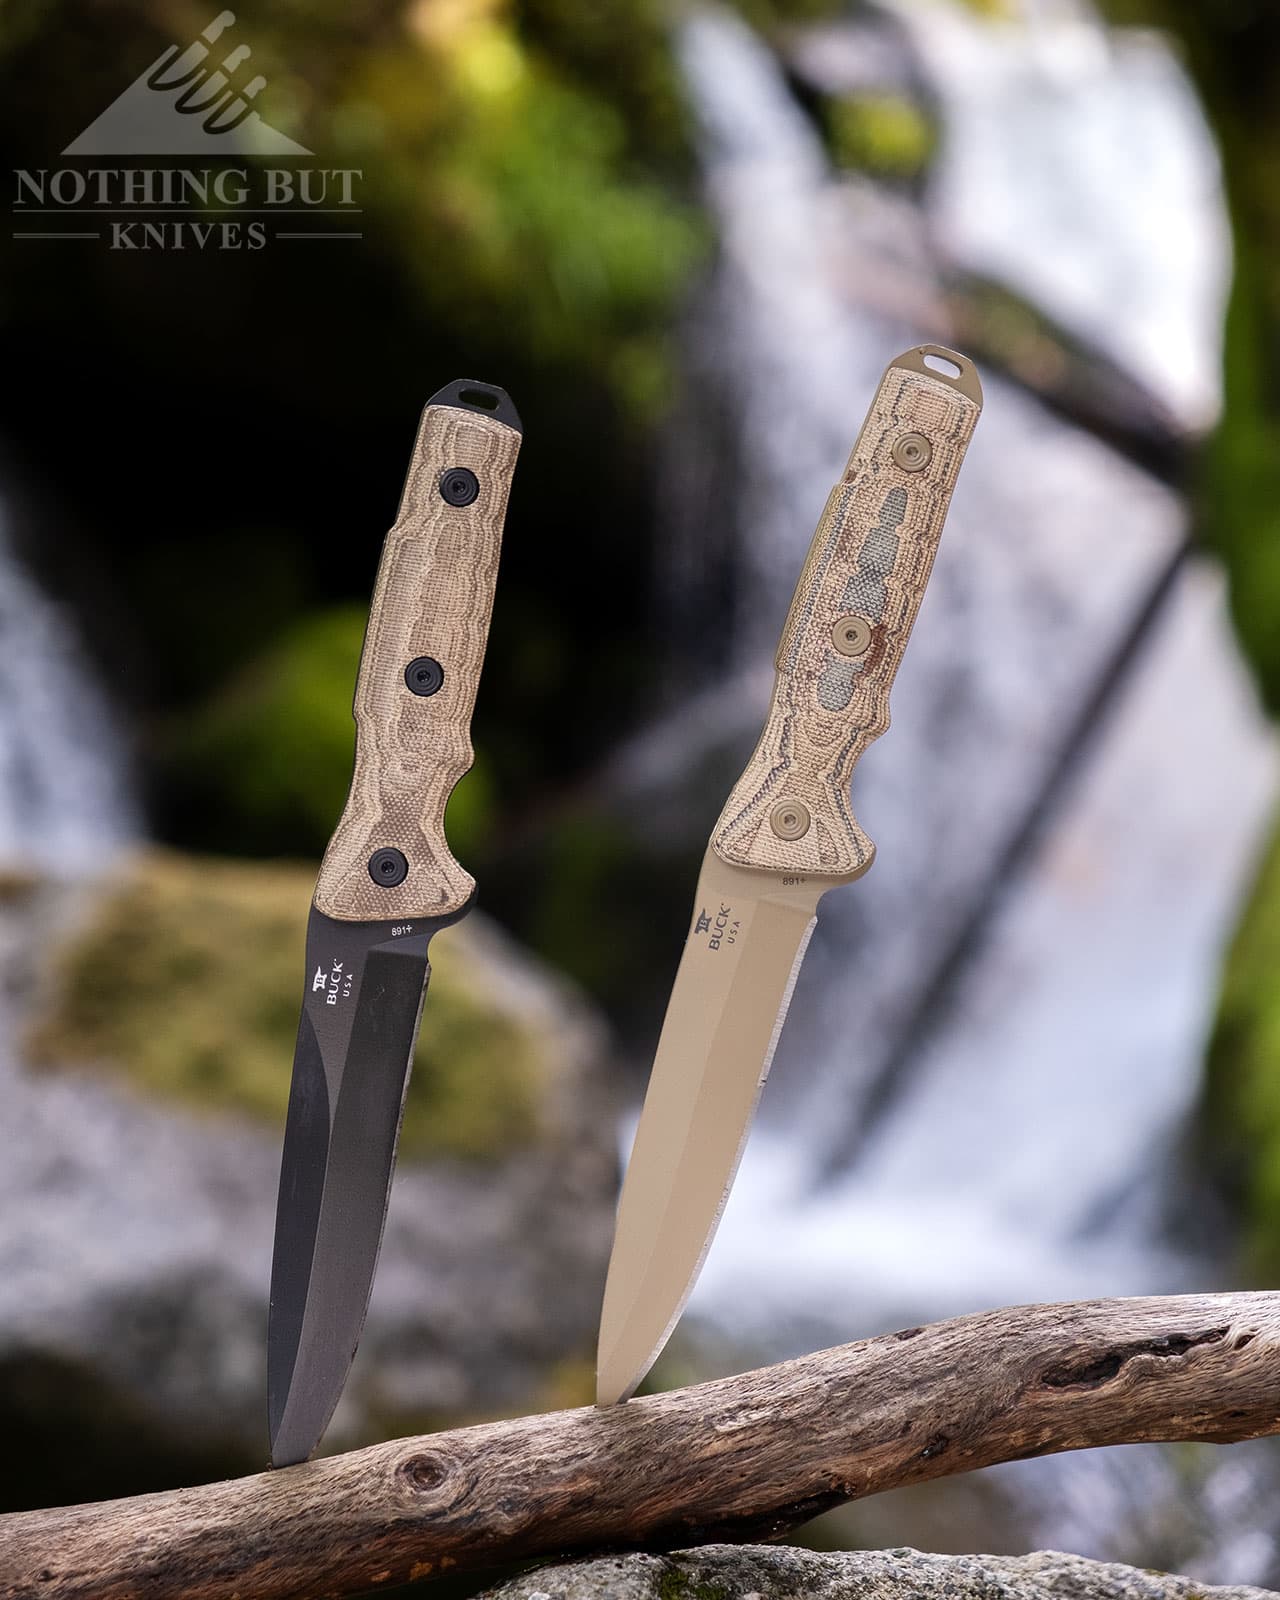 We used two different versions of the GCK when writing this knife review.